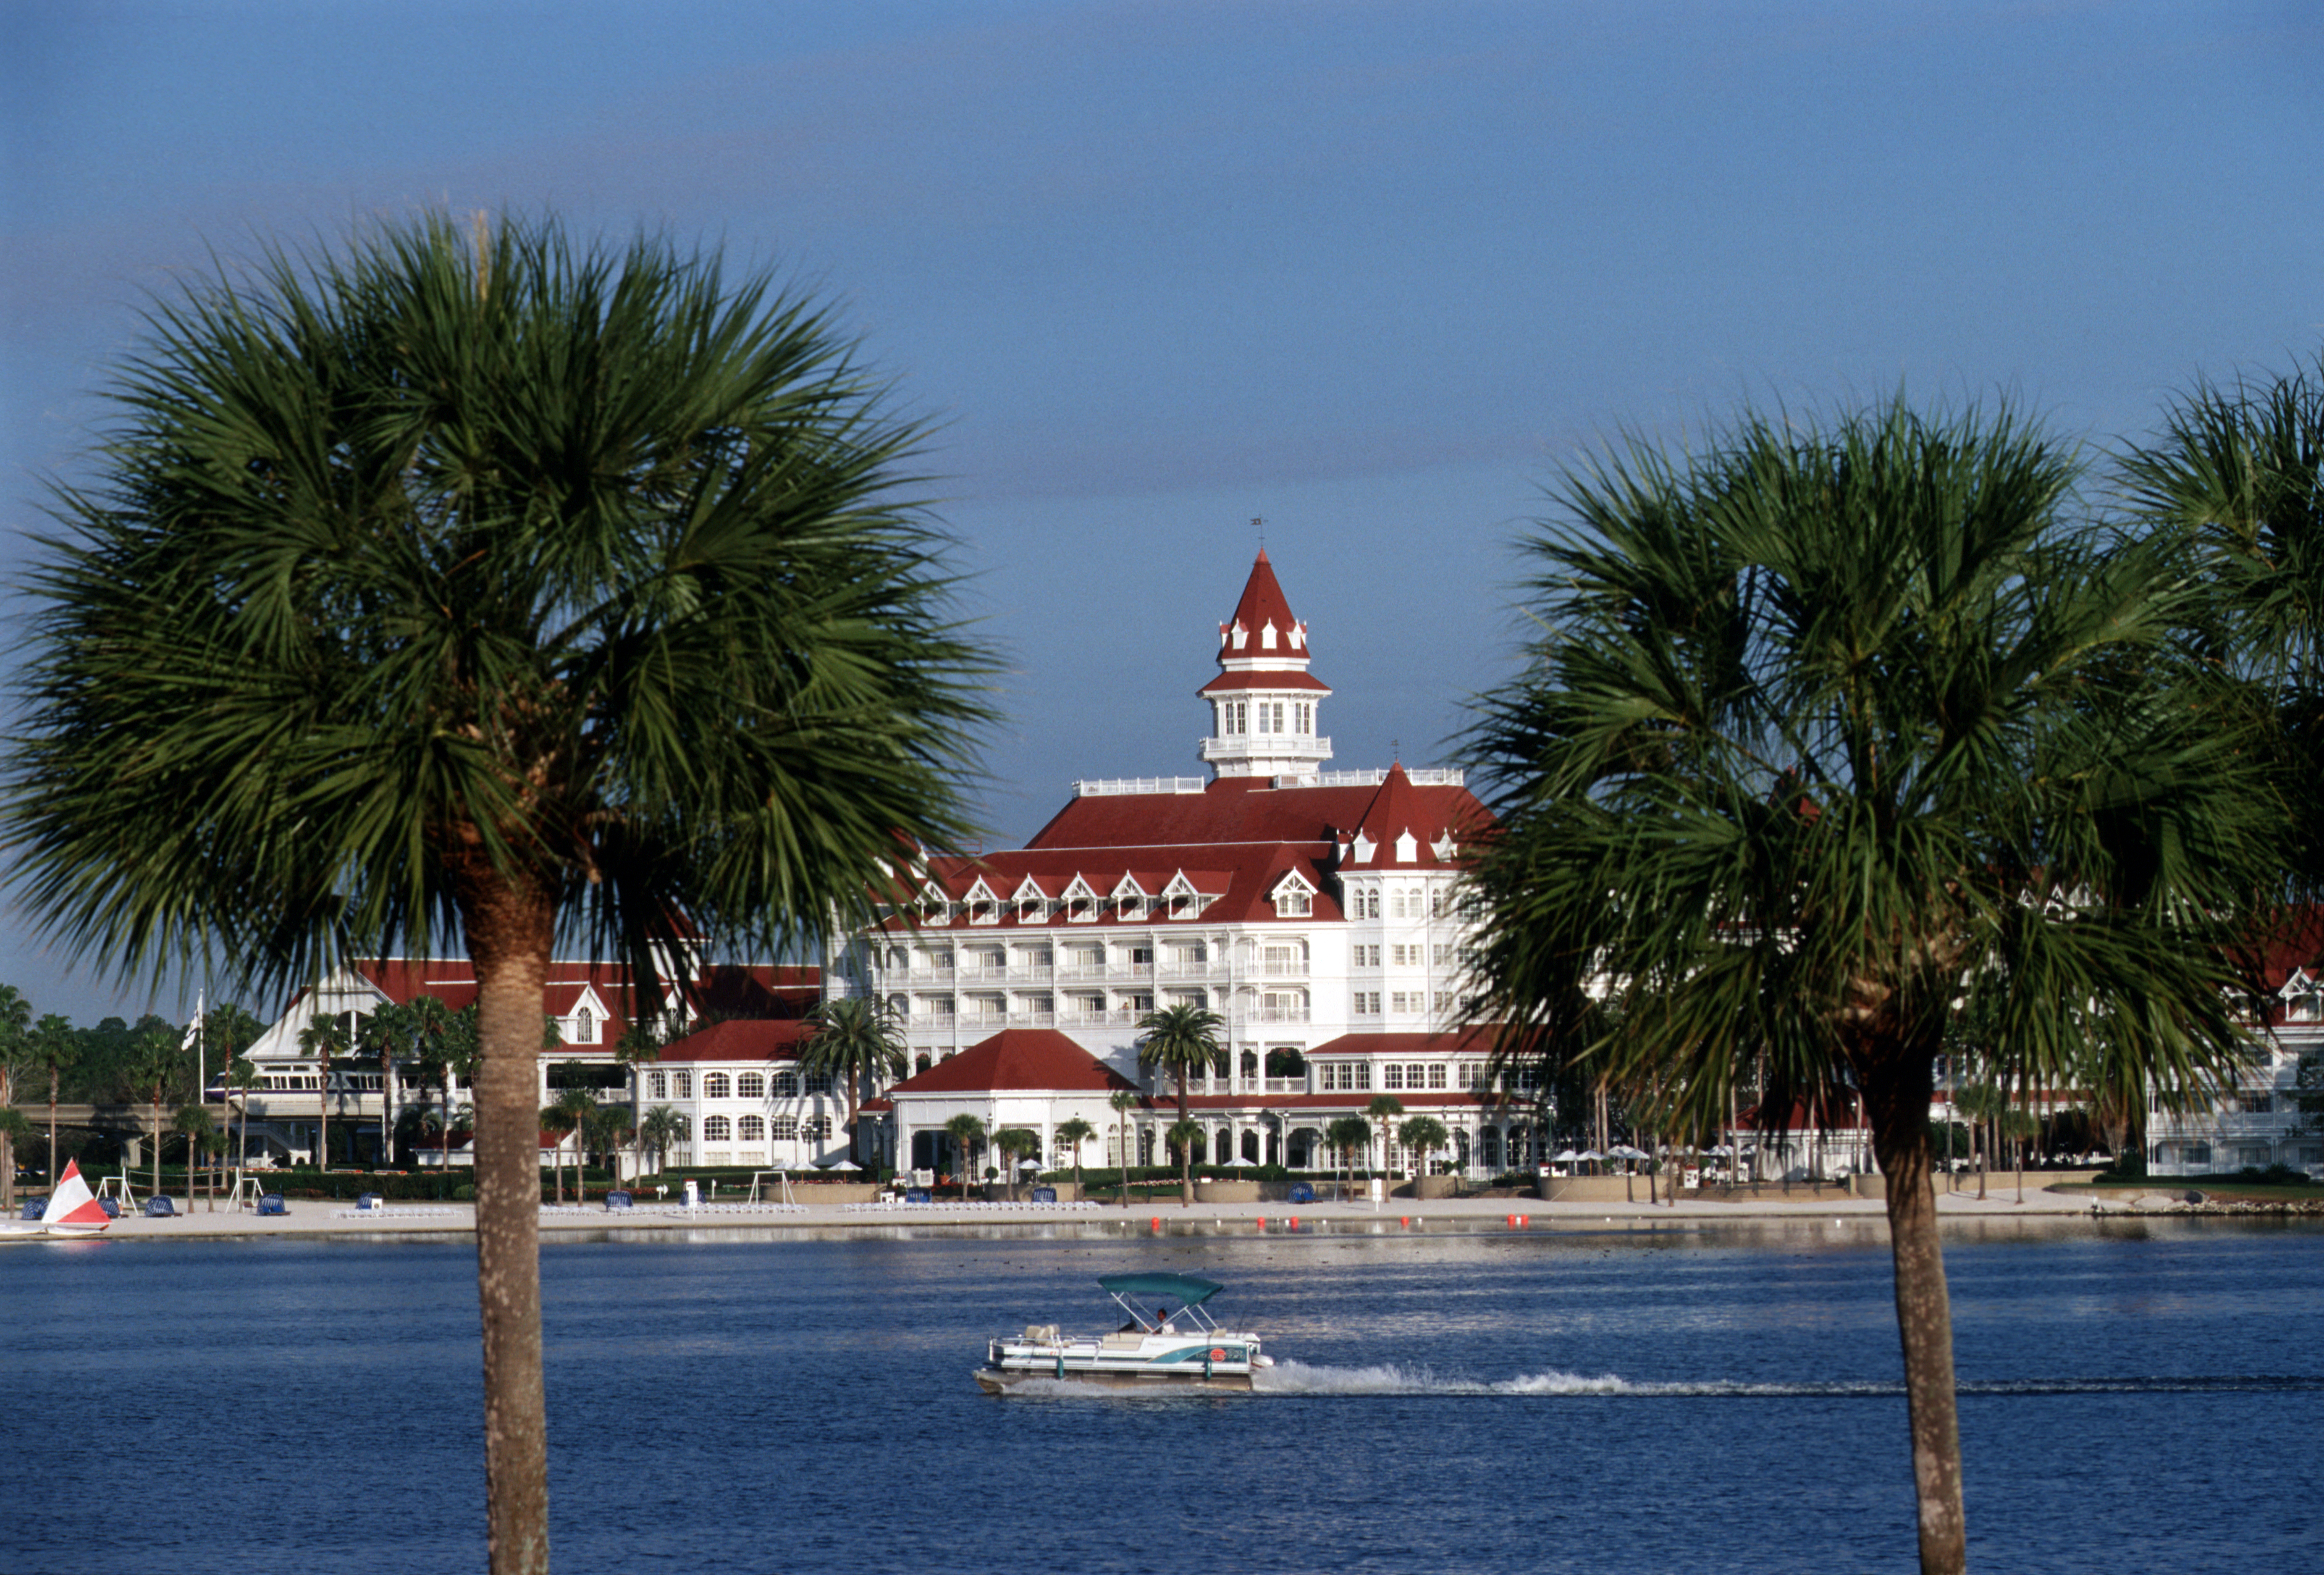 Save Up to 20% On Rooms at Select Disney World Resort Hotels